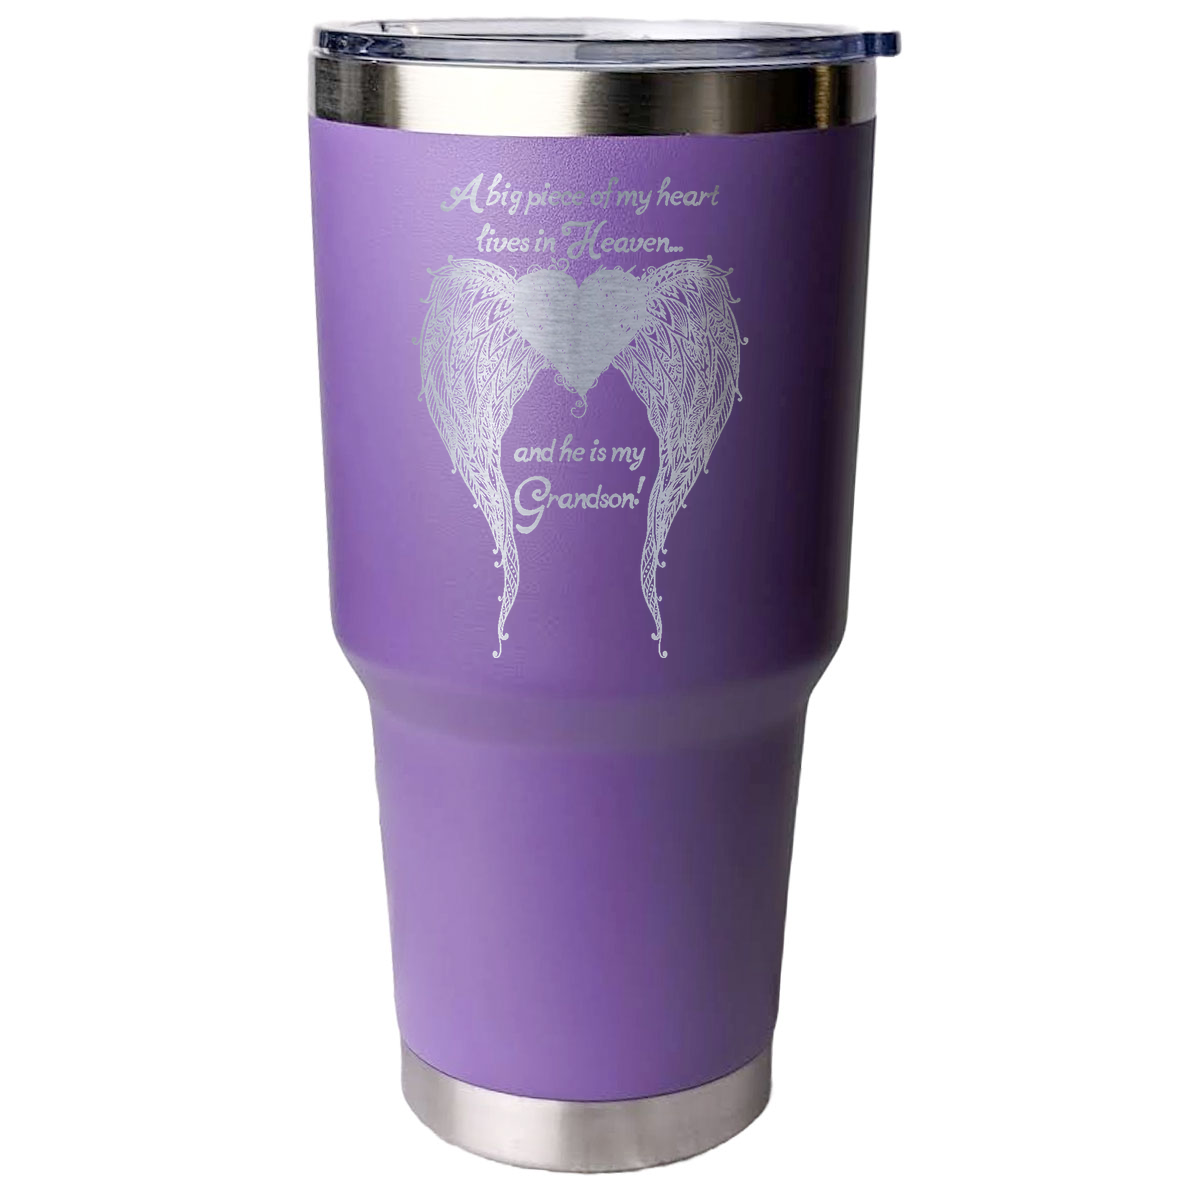 Grandson - A Big Piece of my Heart 30 Ounce Laser Etched Tumbler Purple